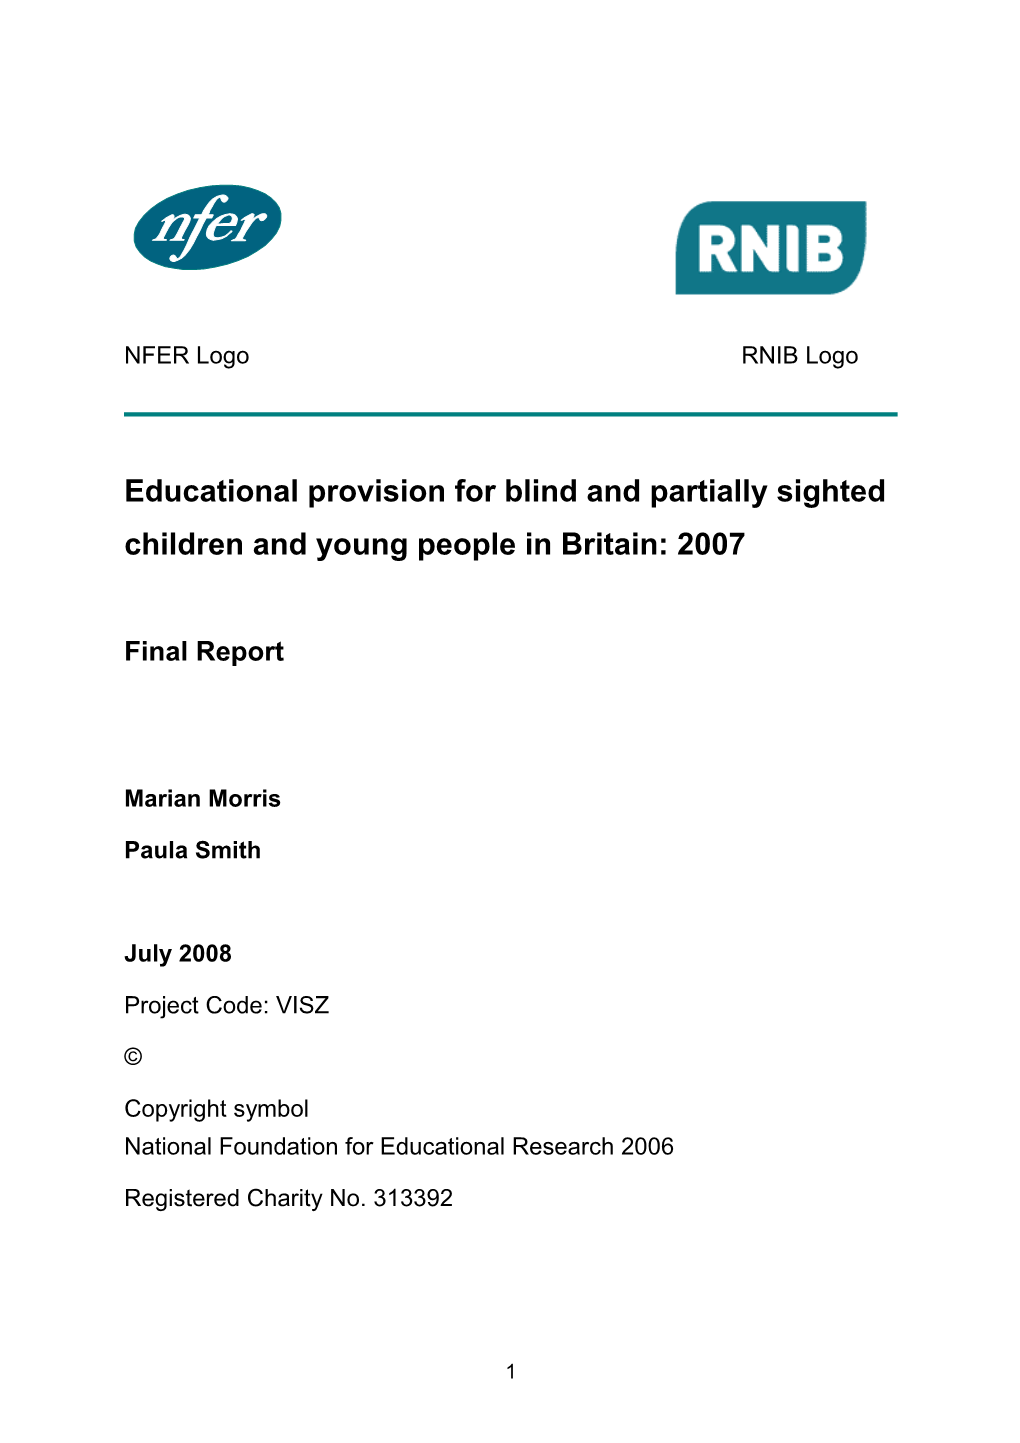 Educational Provision for Blind and Partially Sighted Children and Young People in Britain: 2007